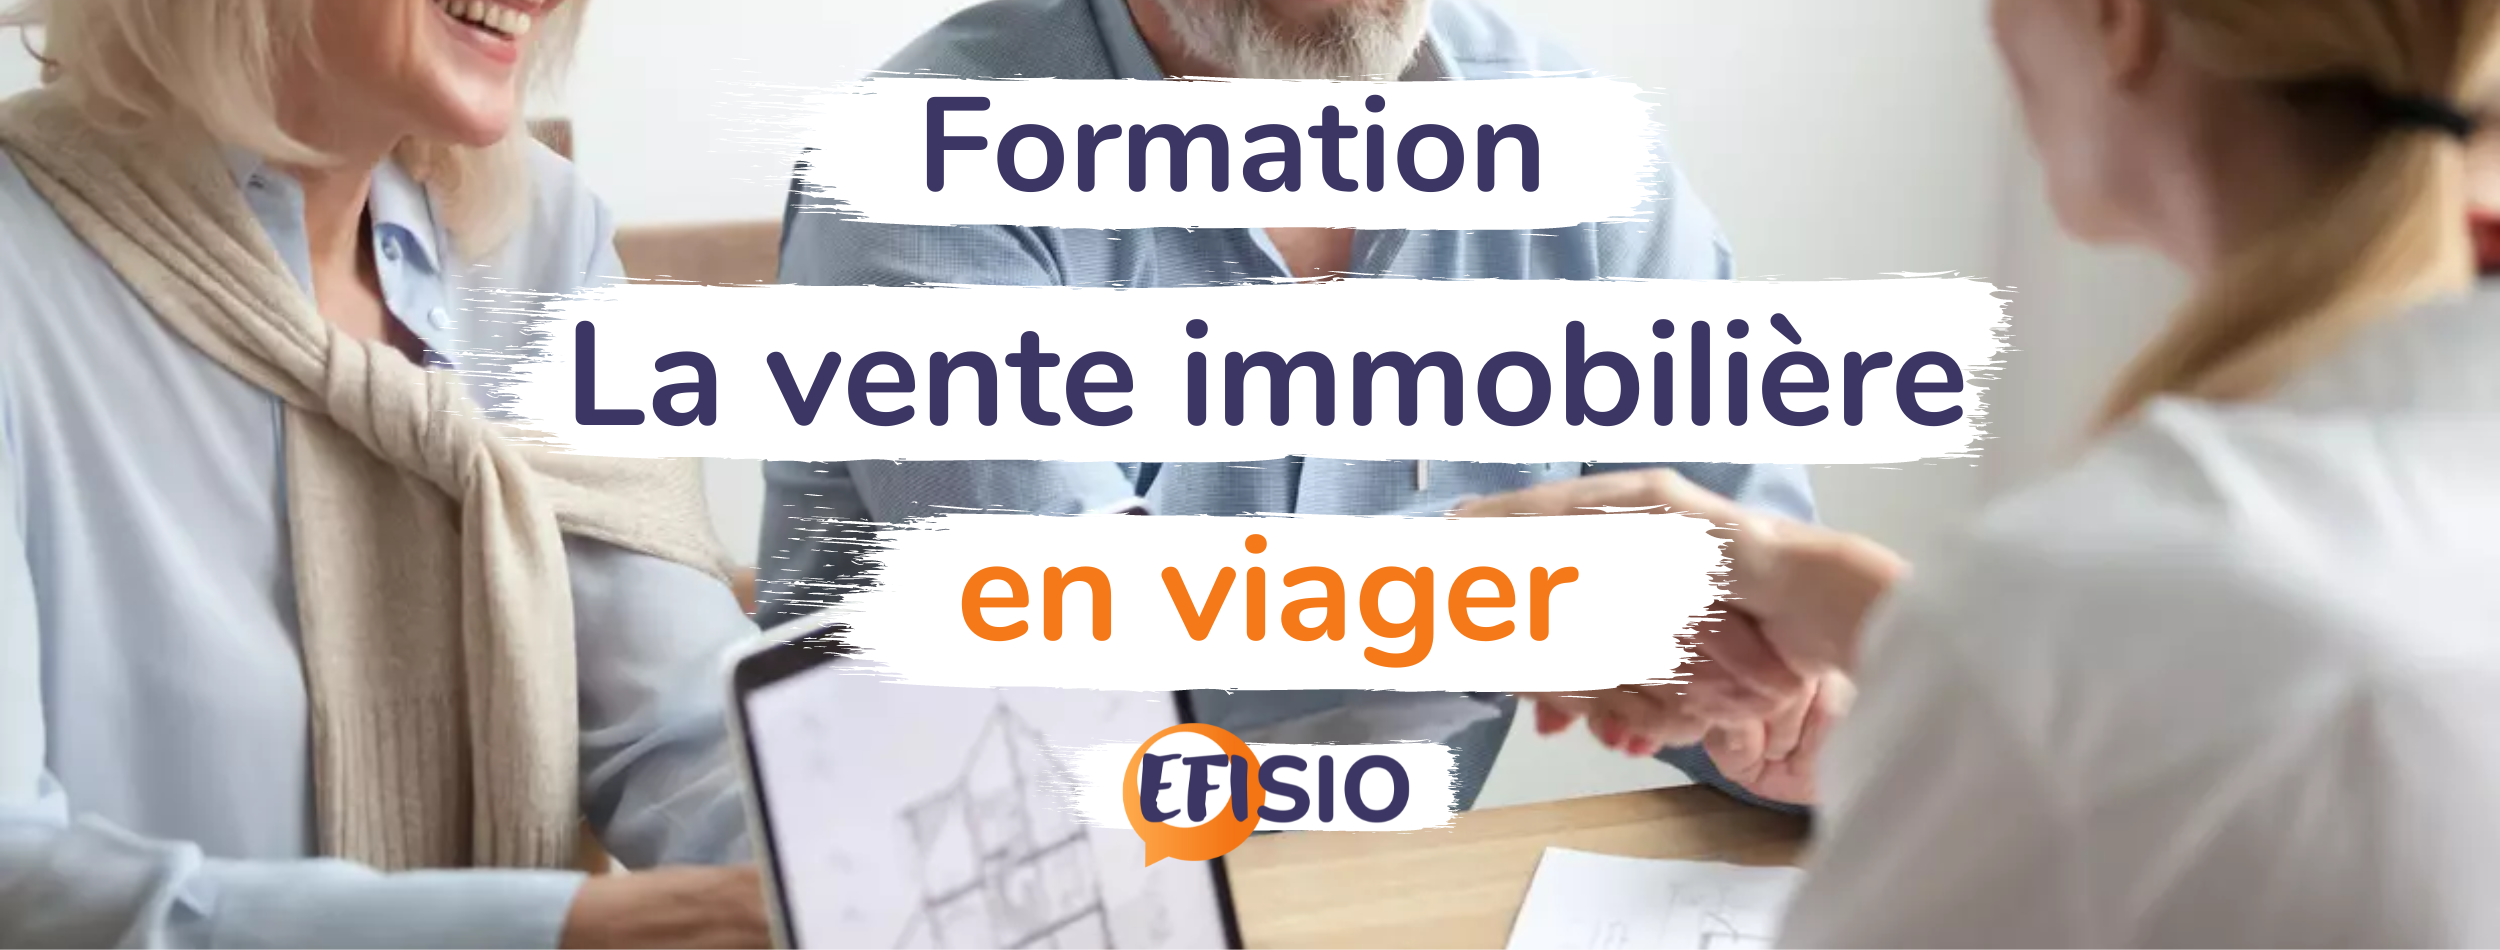 Formation viager